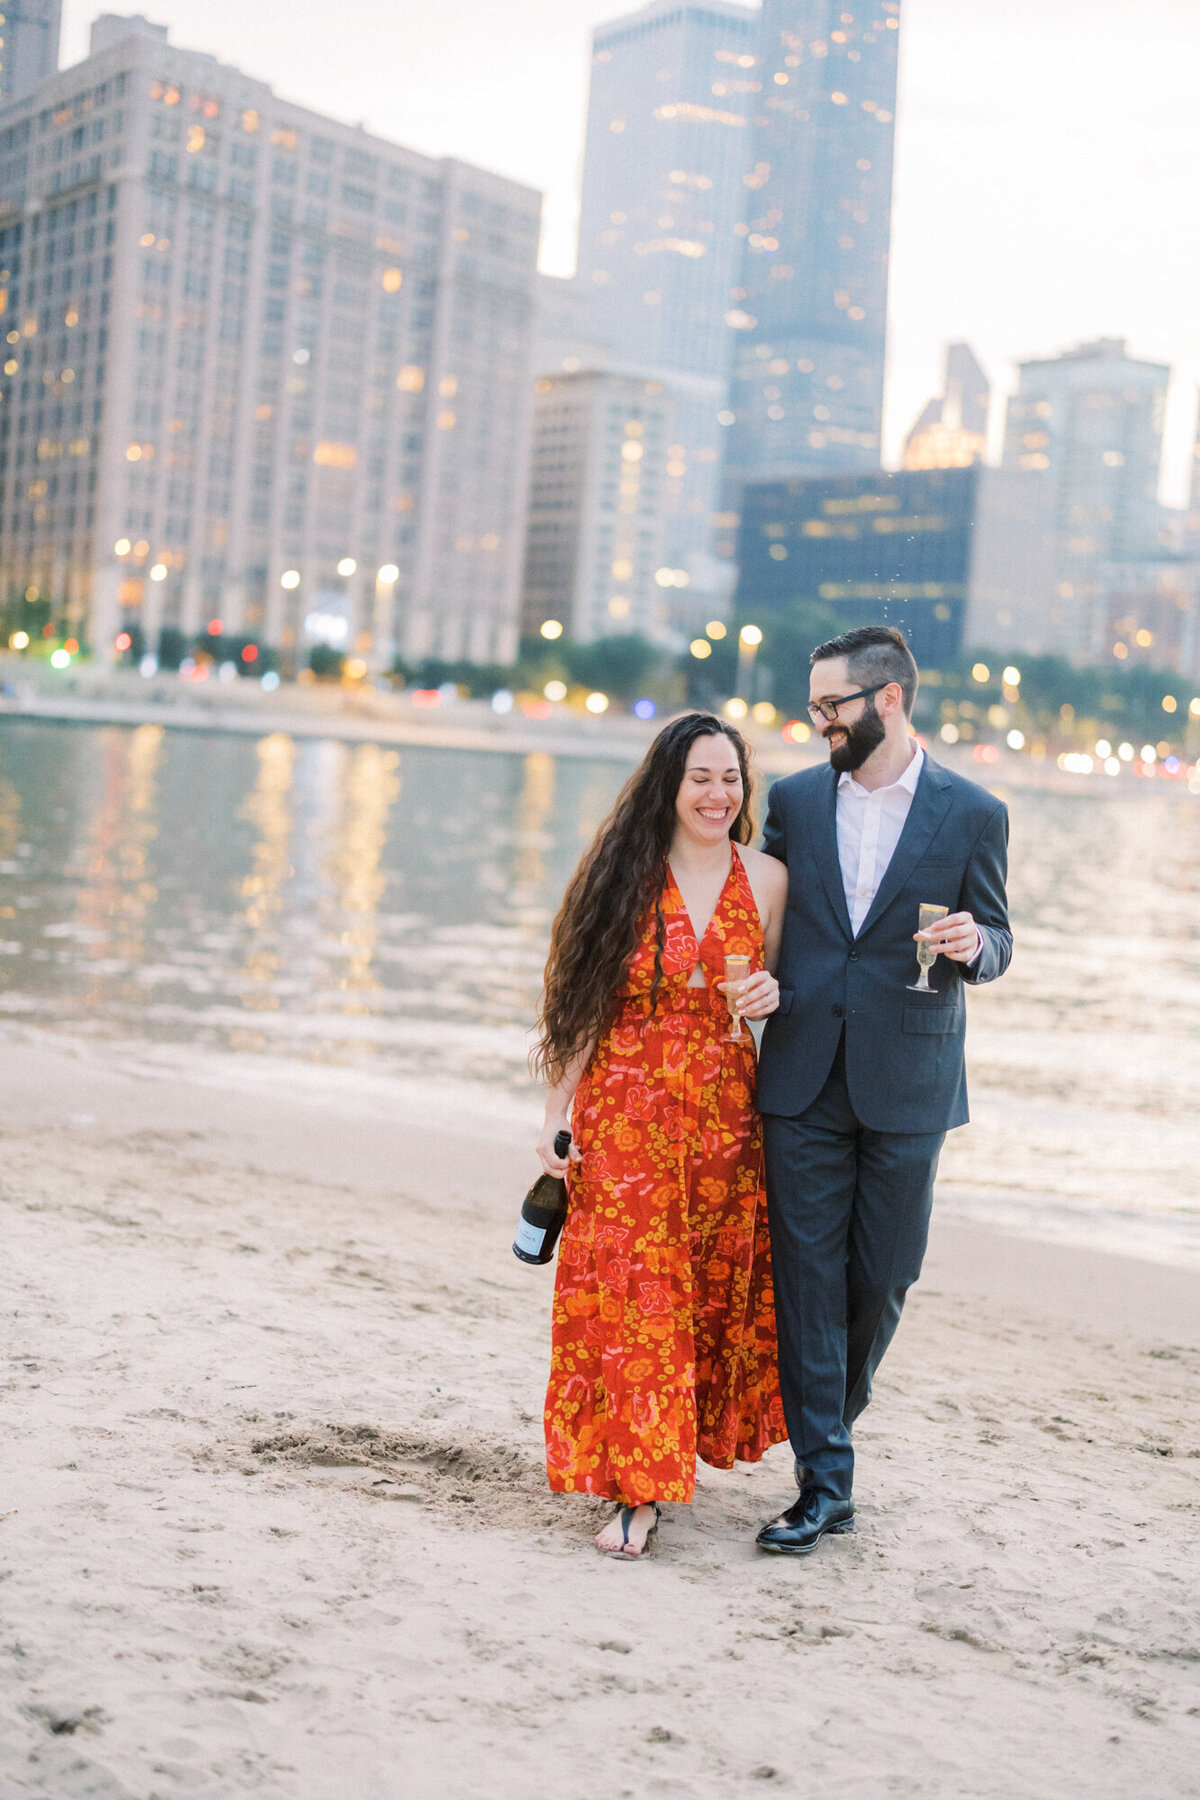 A couple enjoys champagne as they walk along the beach for their engagement photo